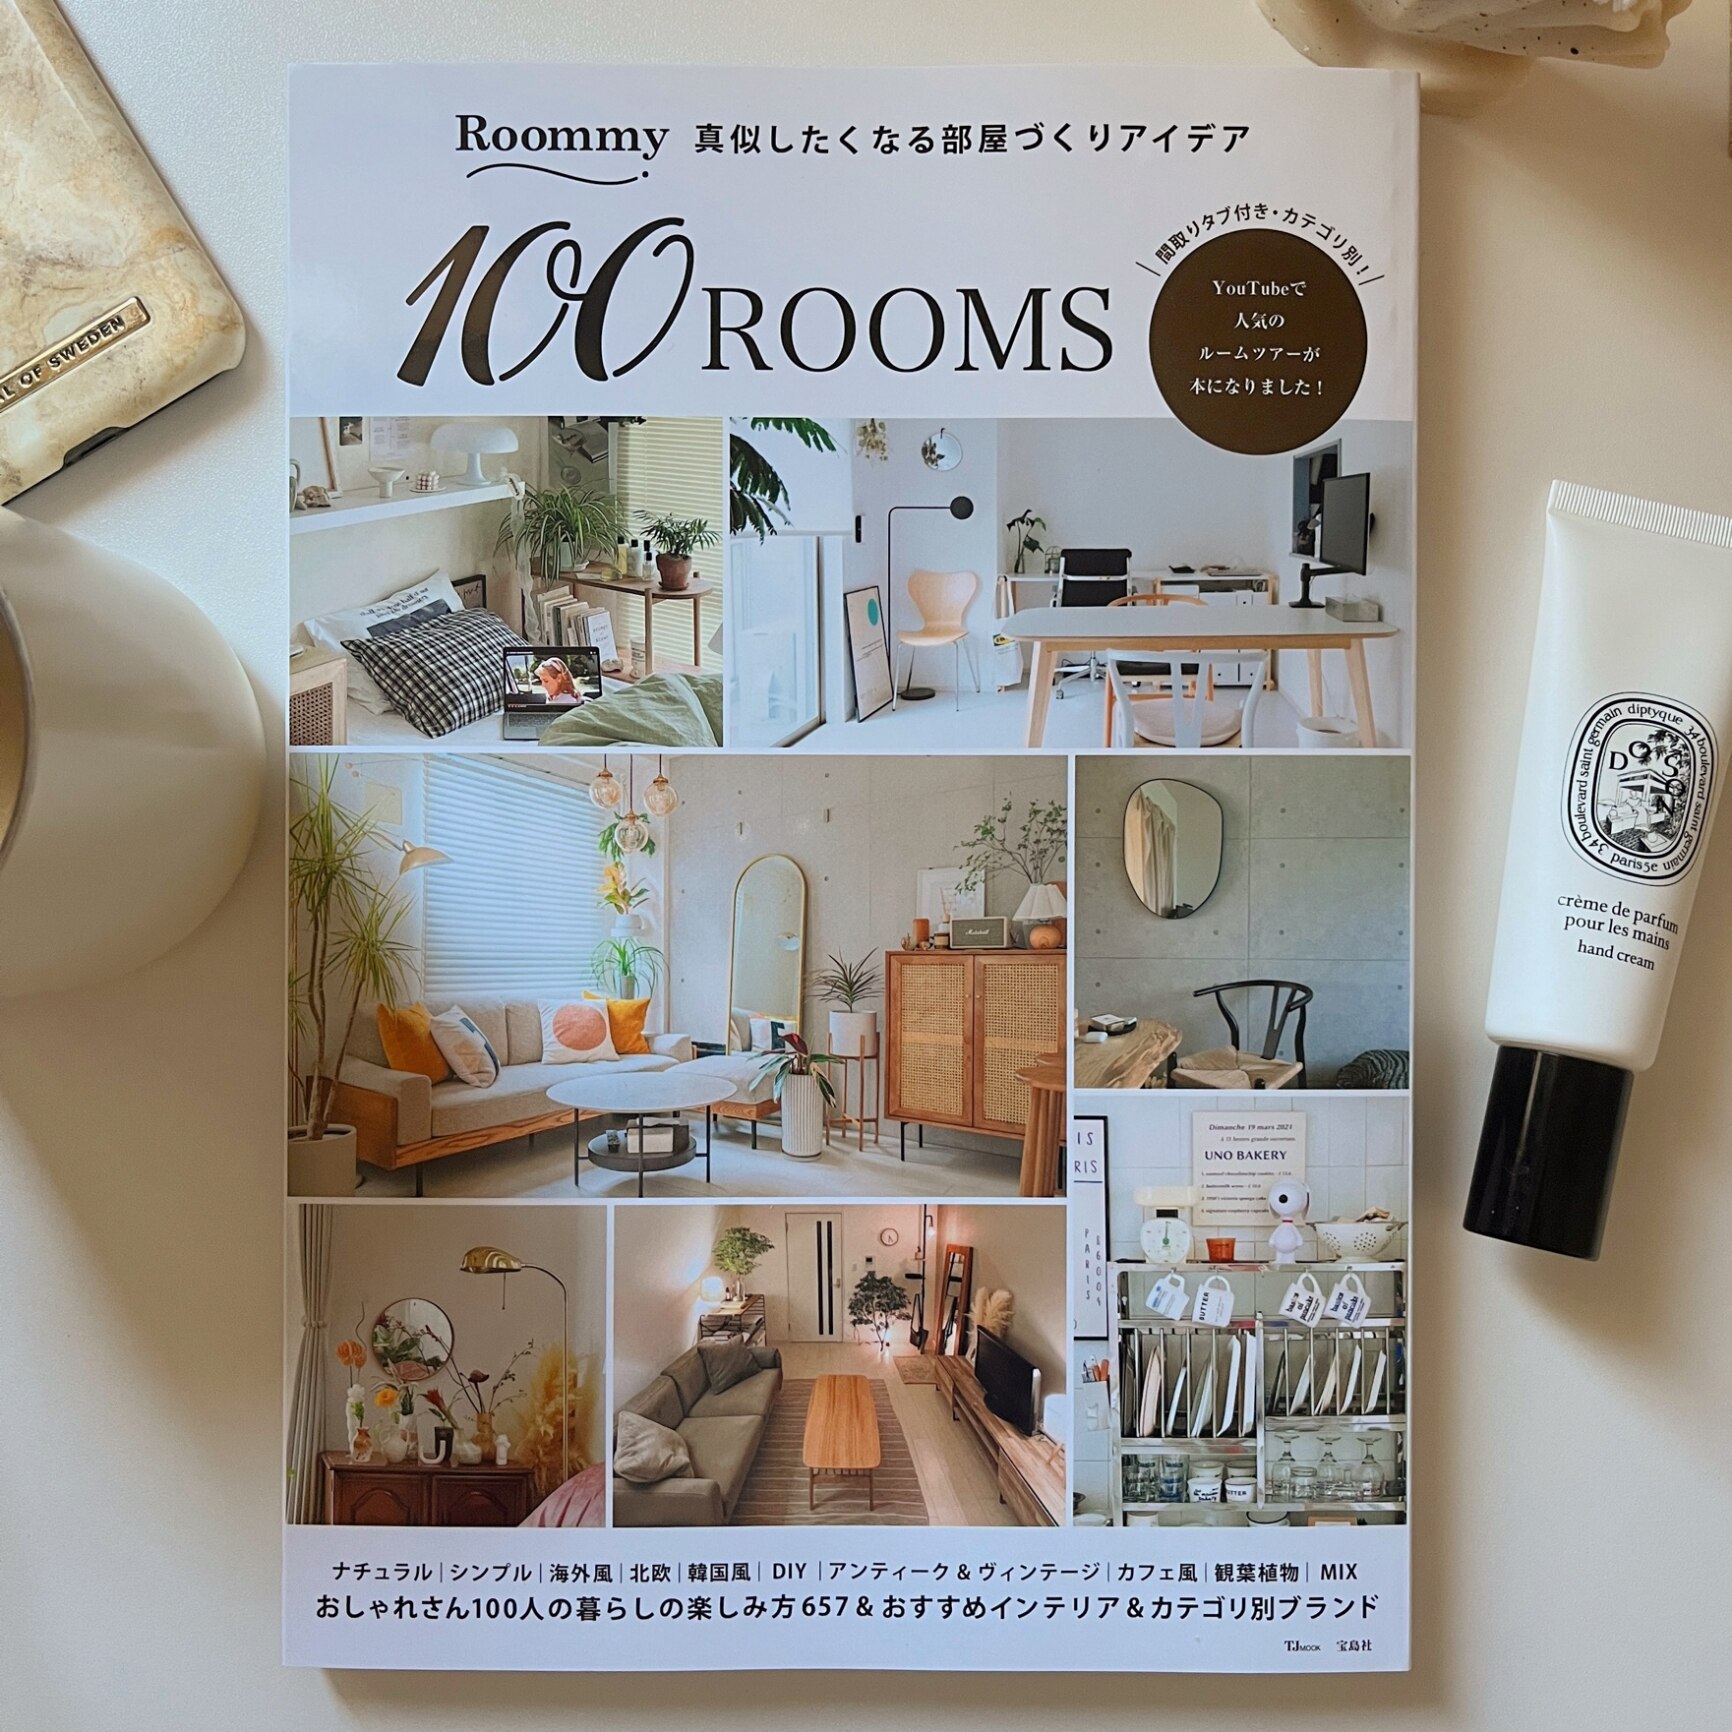 Roommy 真似したくなる部屋づくりアイデア 100ROOMS （TJMOOK